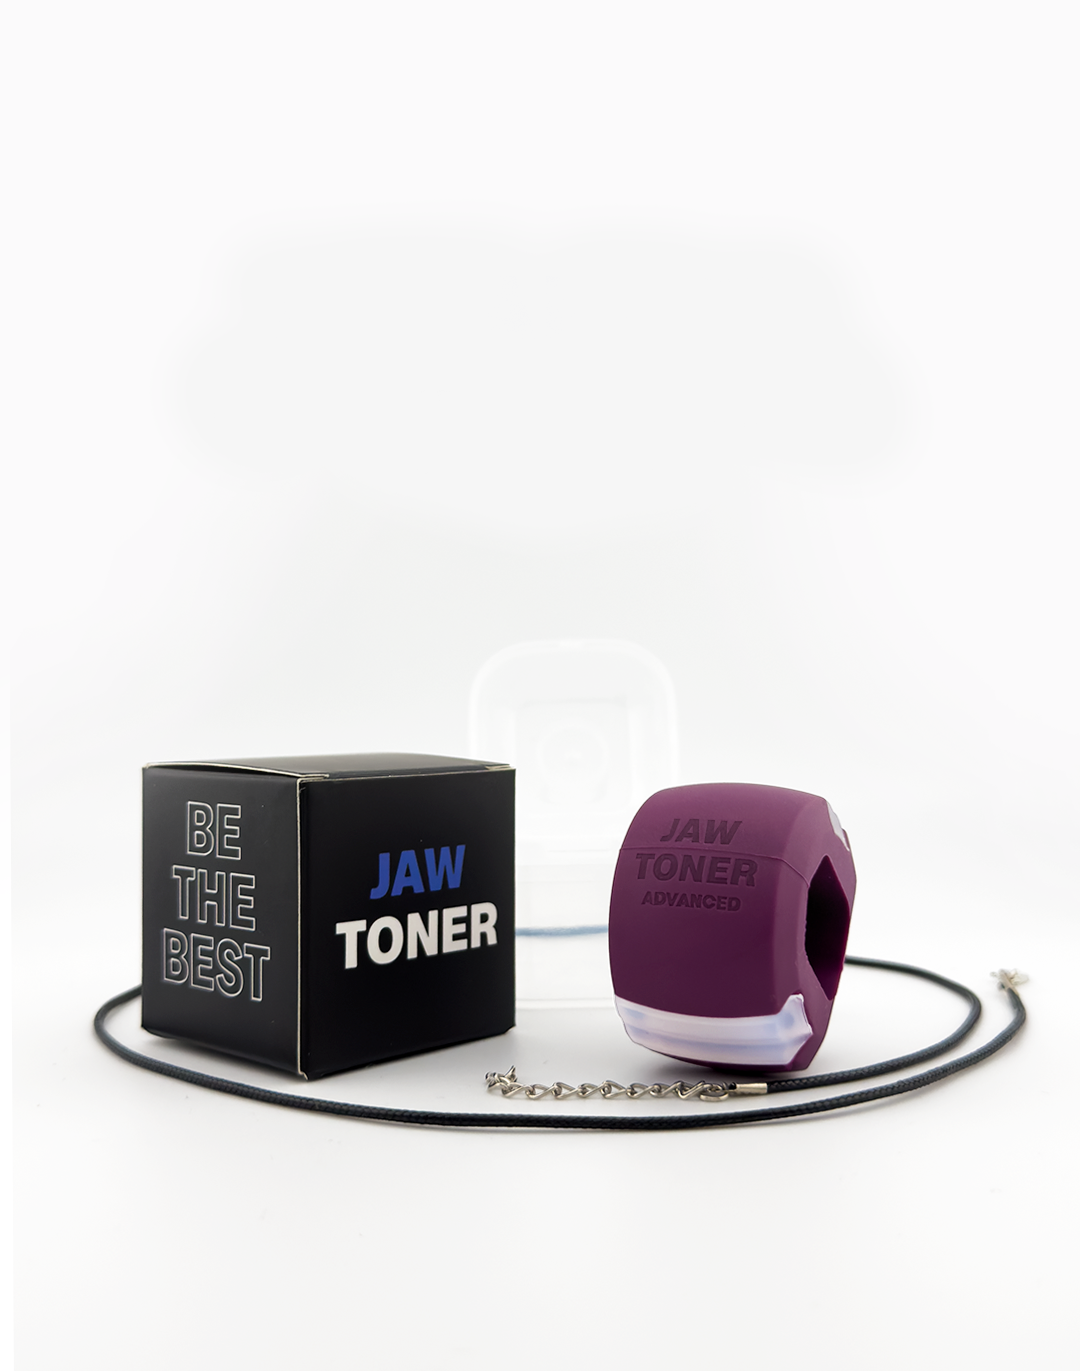 Jaw Toner 2.0 Limited Edition